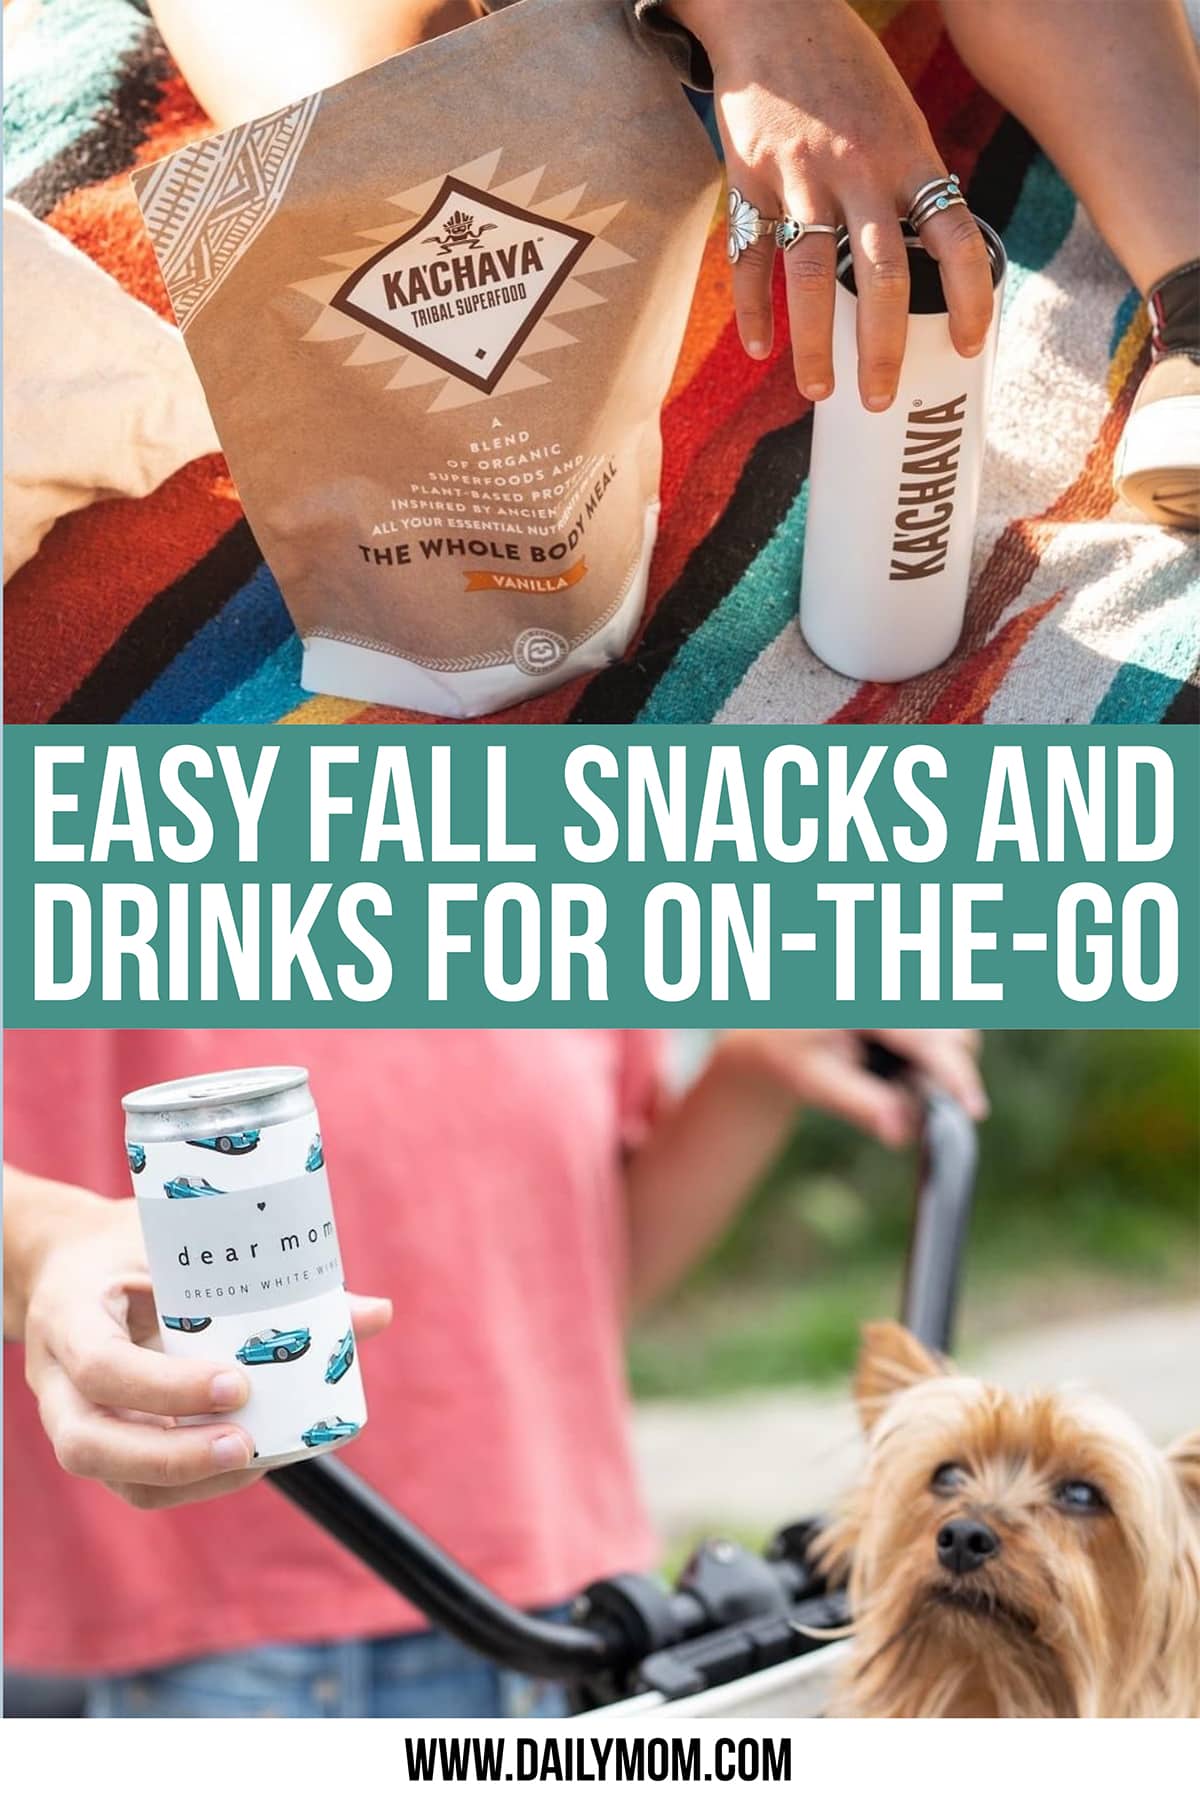 26 Easy Fall Snacks And Drinks For On-The-Go